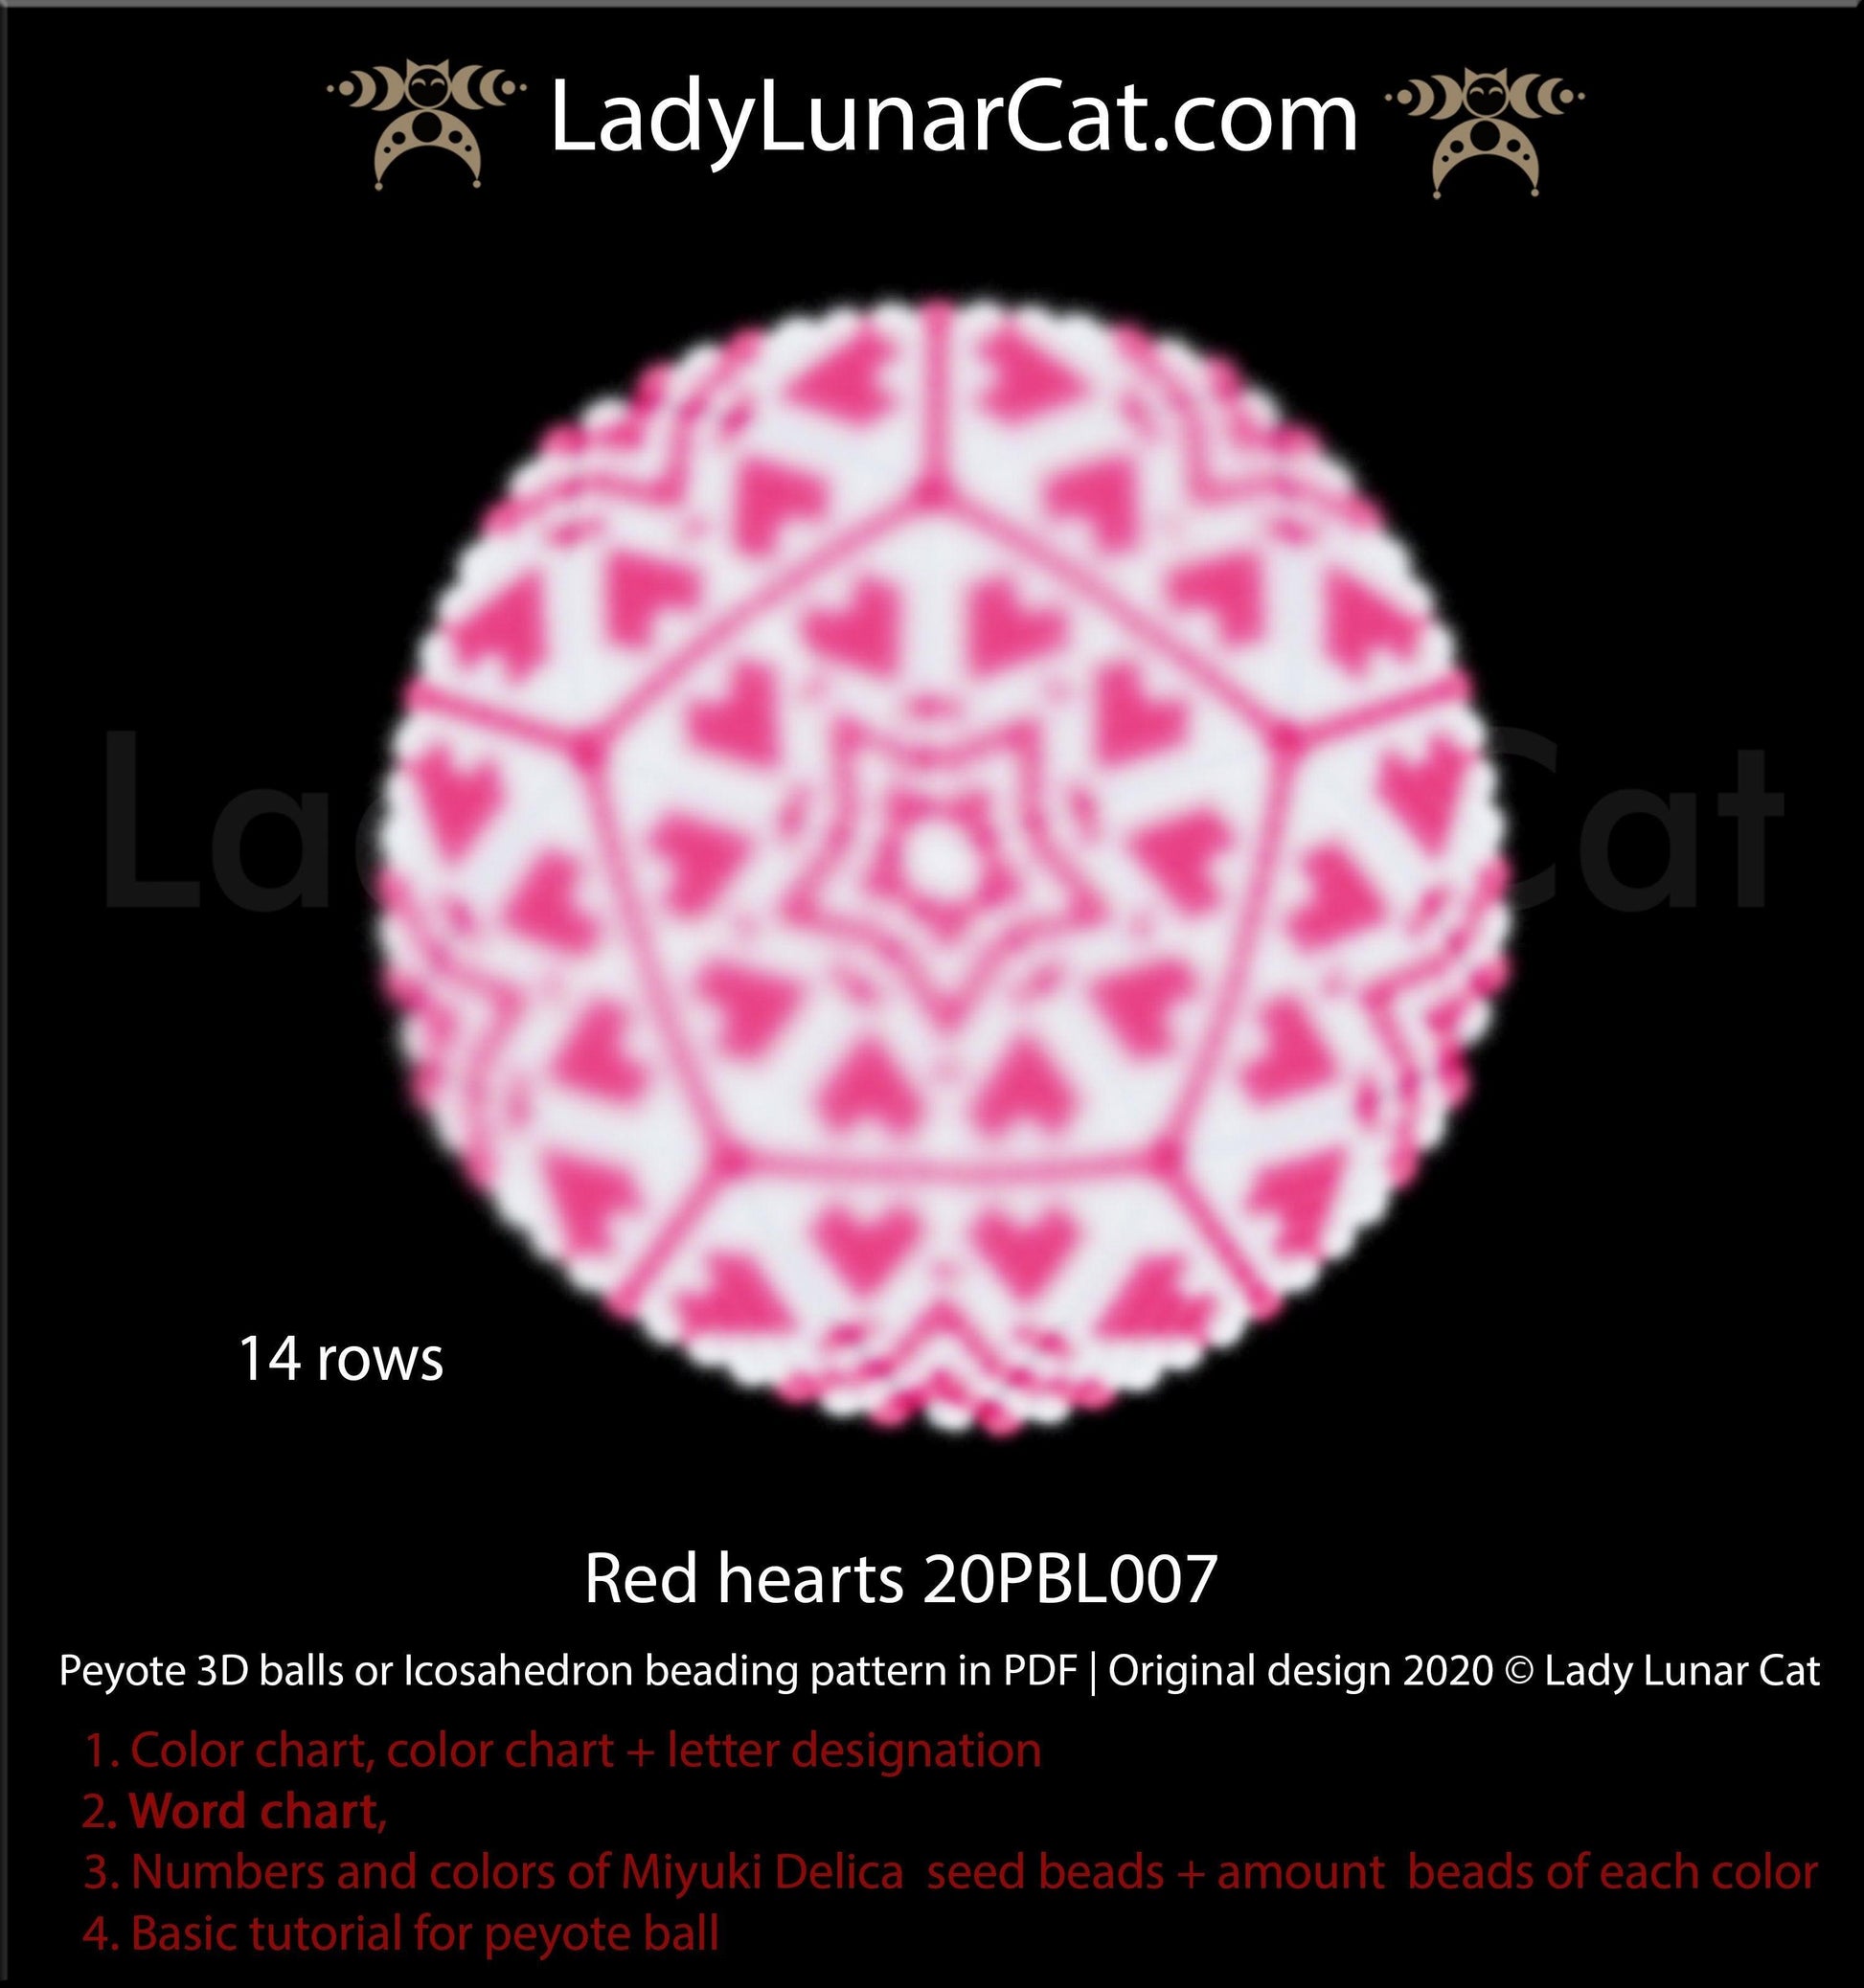 Peyote 3d ball pattern for beading | Beaded Icosahedron Red hearts 20PBL007 14 rows LadyLunarCat